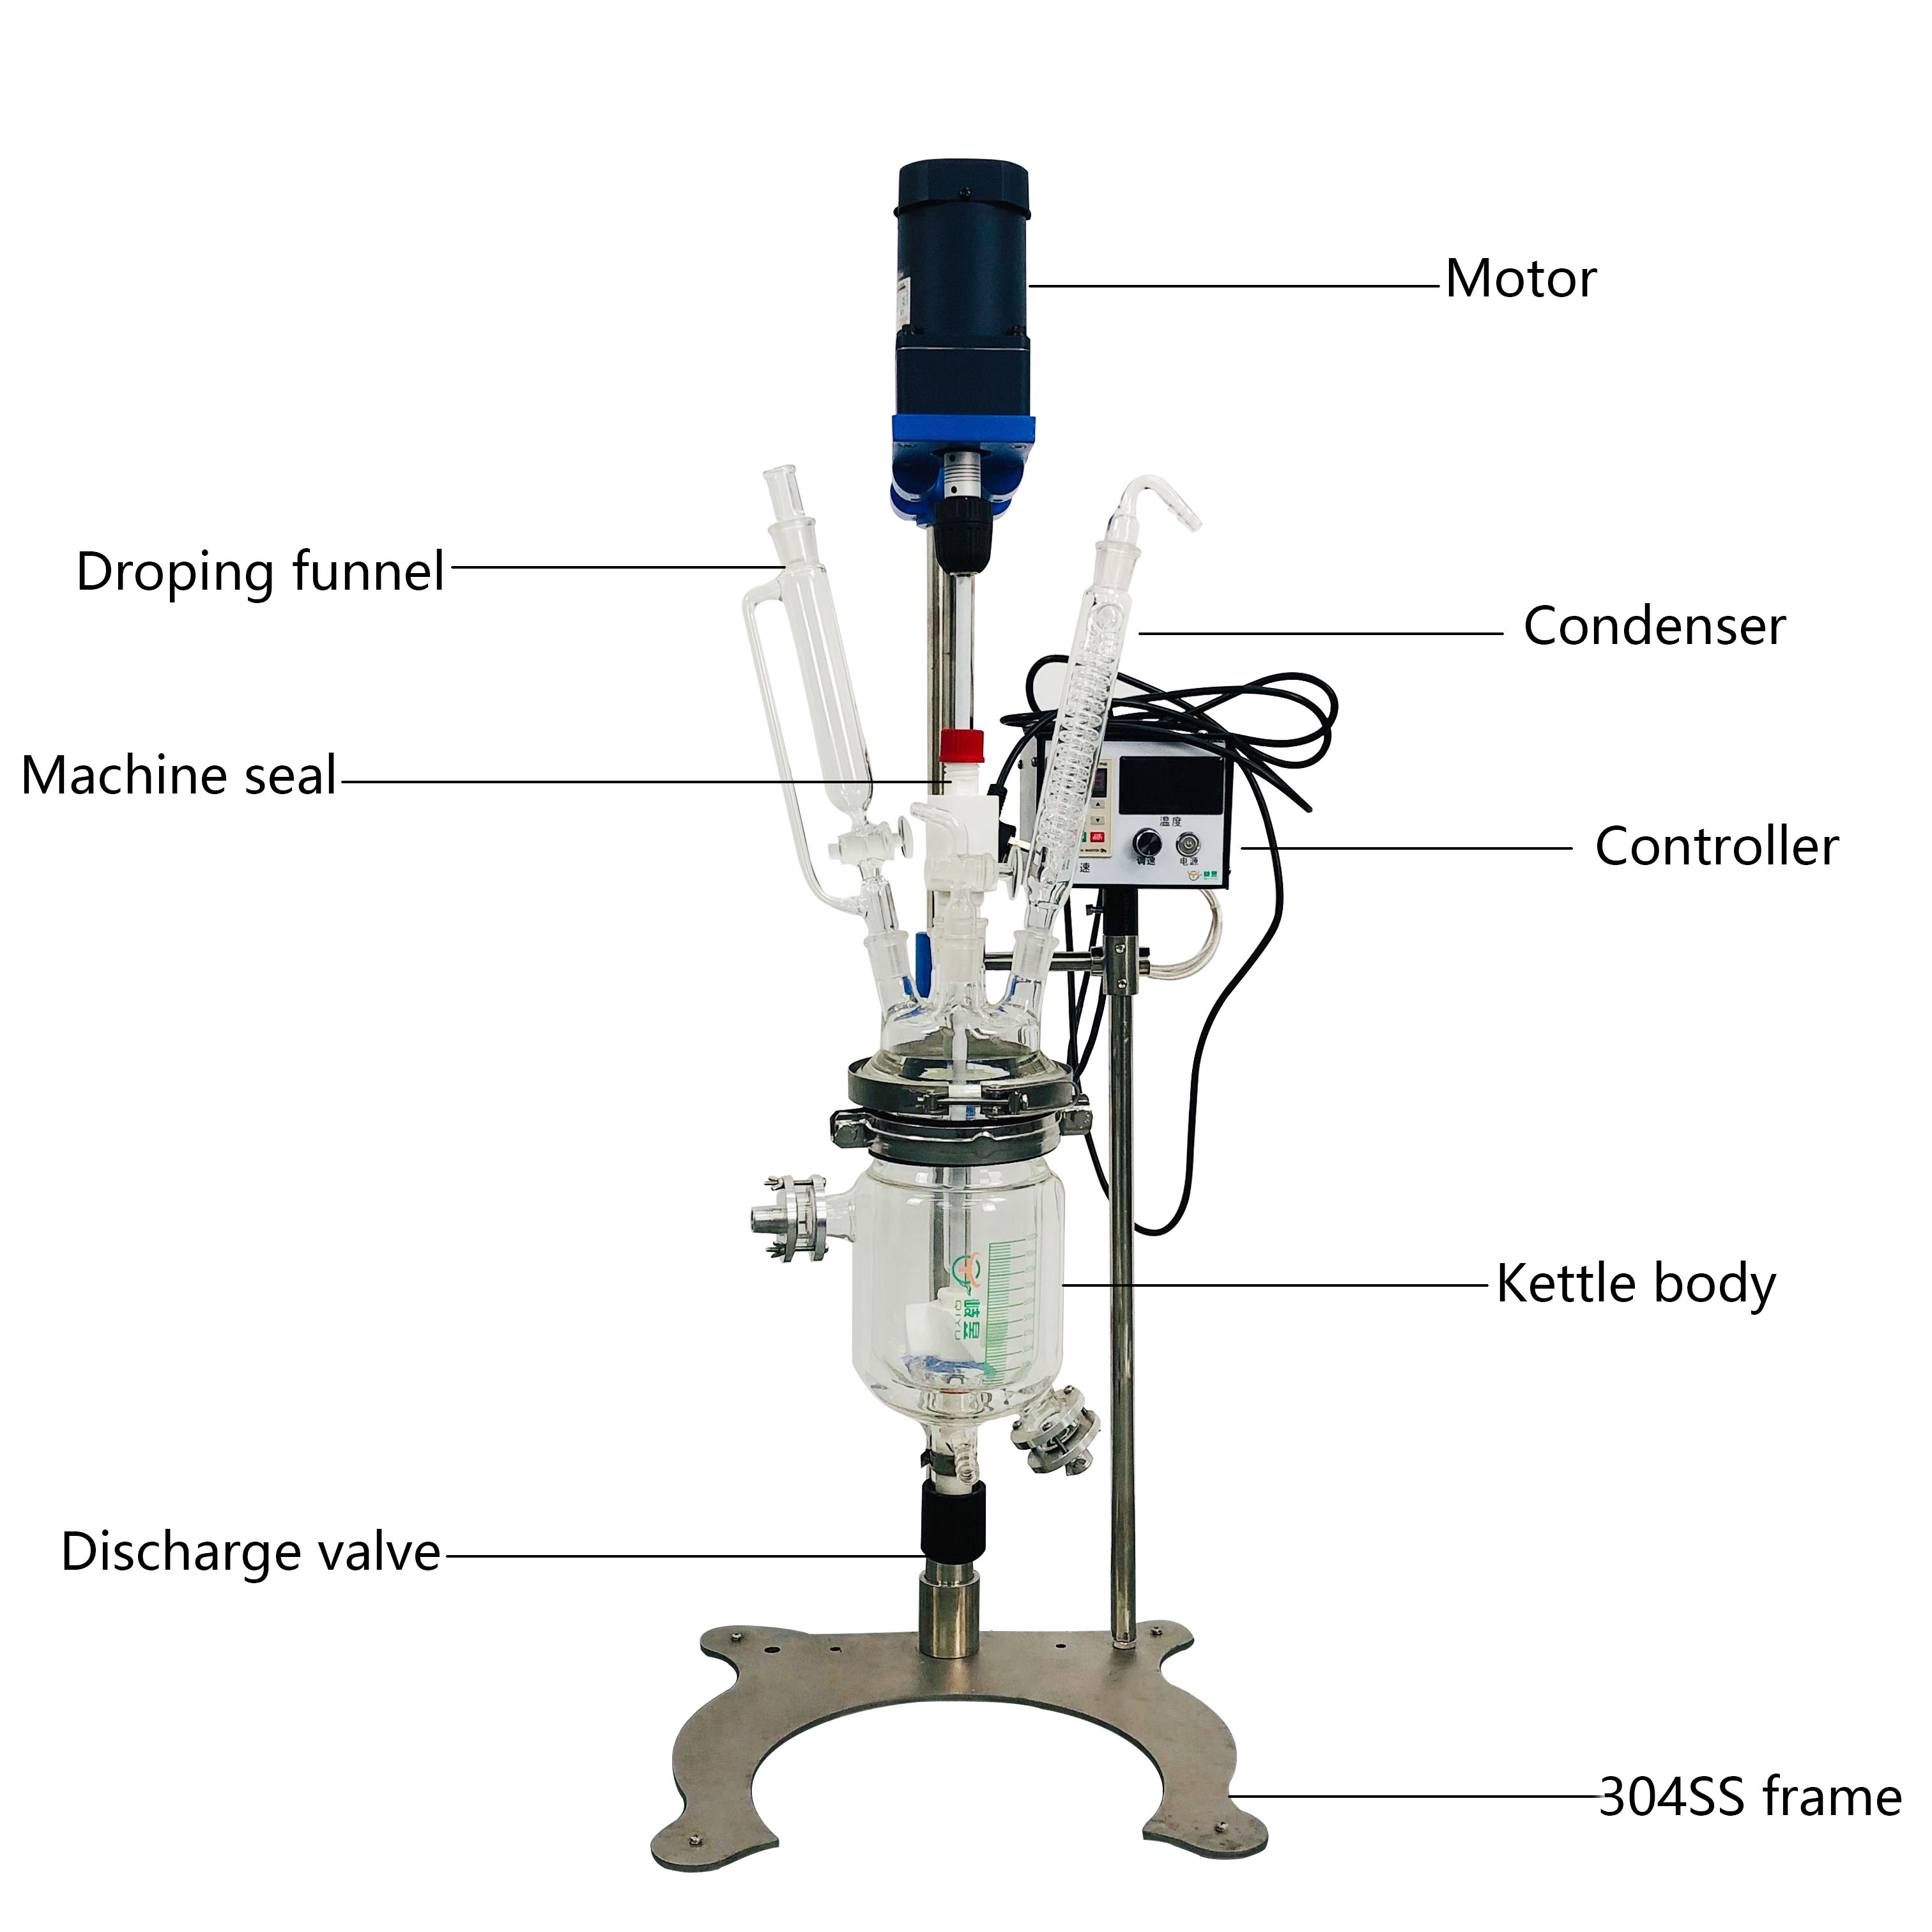 Hot Selling Small Chemical Laboratory Equipment 500ml Double Jacketed Glass Reactor Reaction Kettle